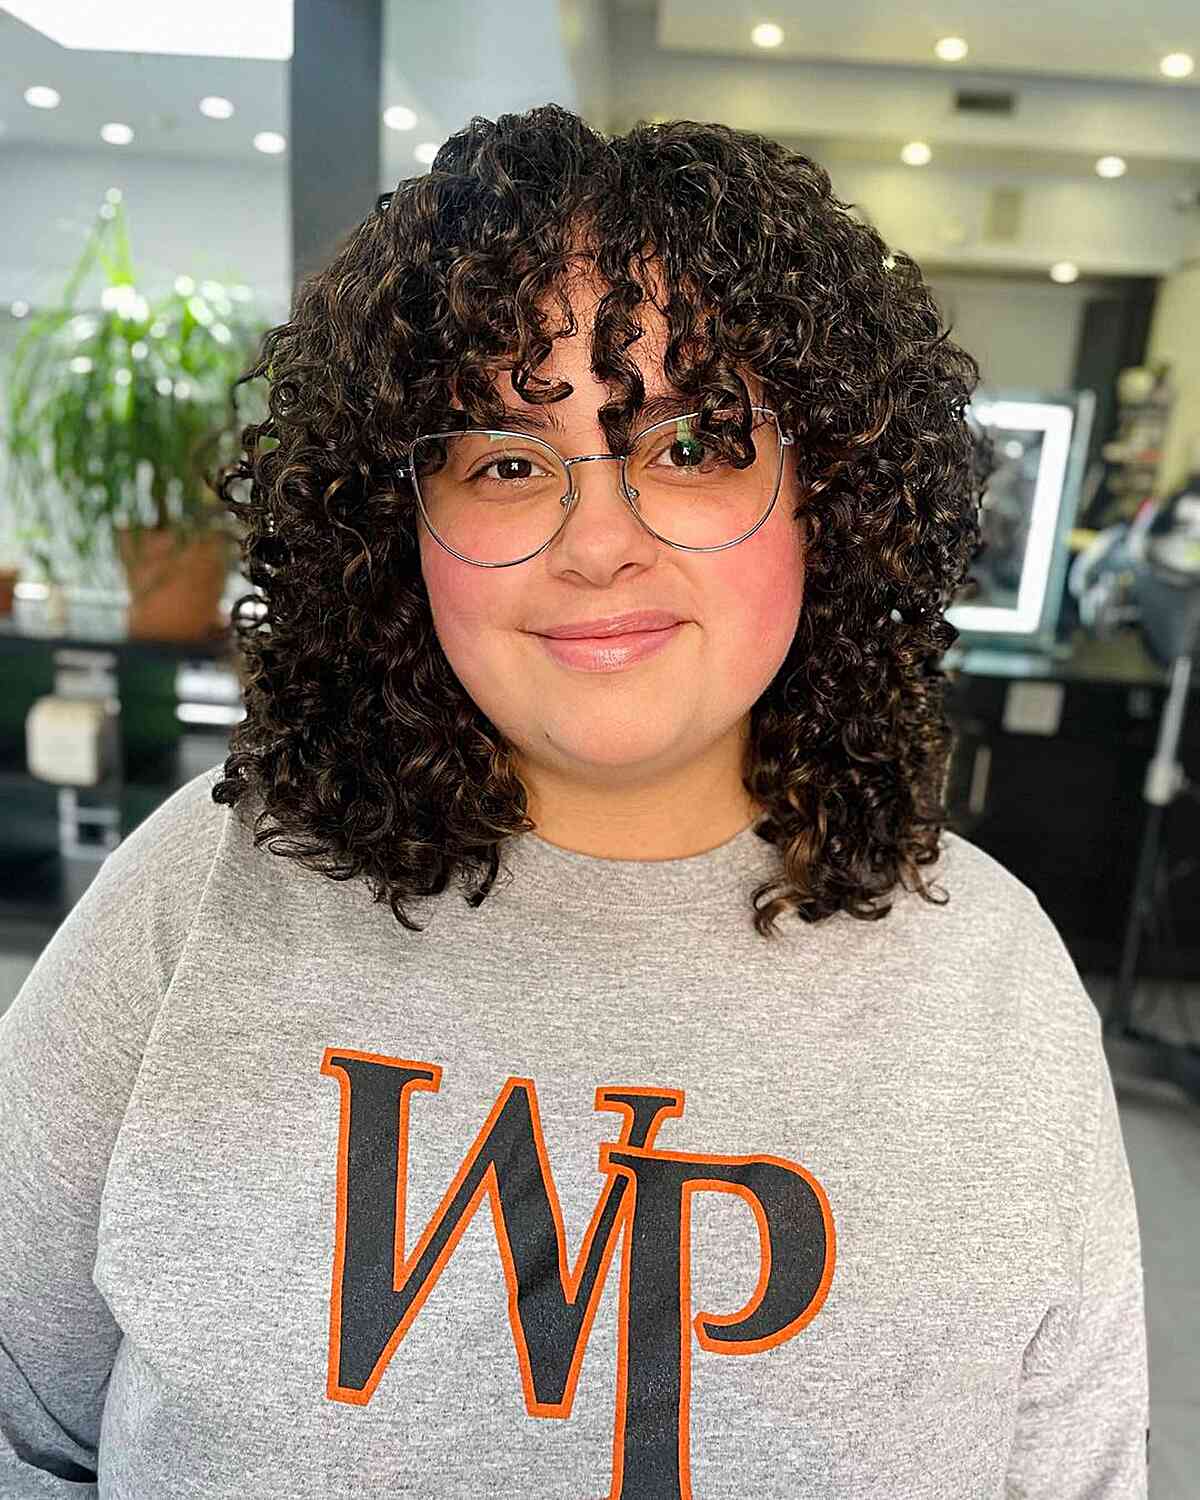 Curly Fringe on a Curly Cut for Full-Faced Women with glasses 